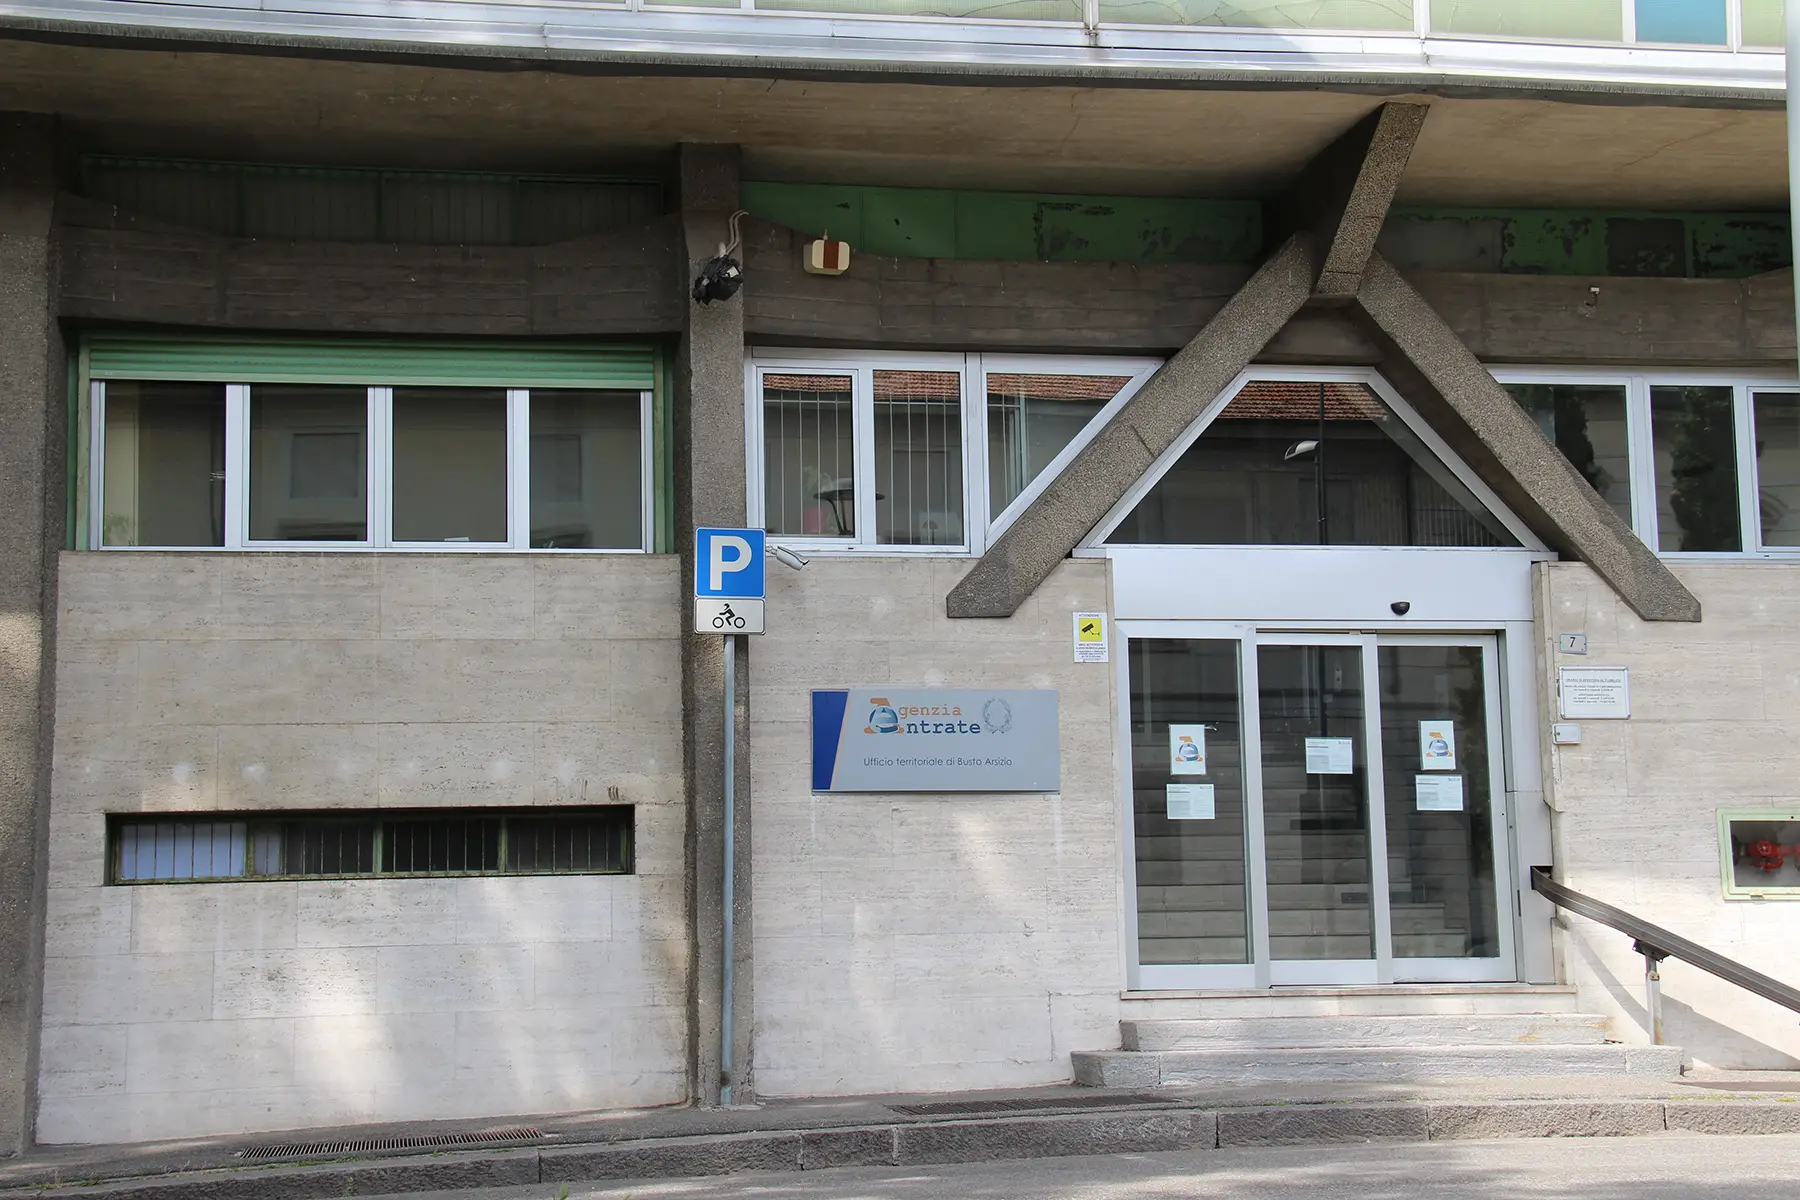 Revenue Agency Office in Busto Arsizio, Varese, an ugly concrete office building. A sign outside says Agenzia entrate.